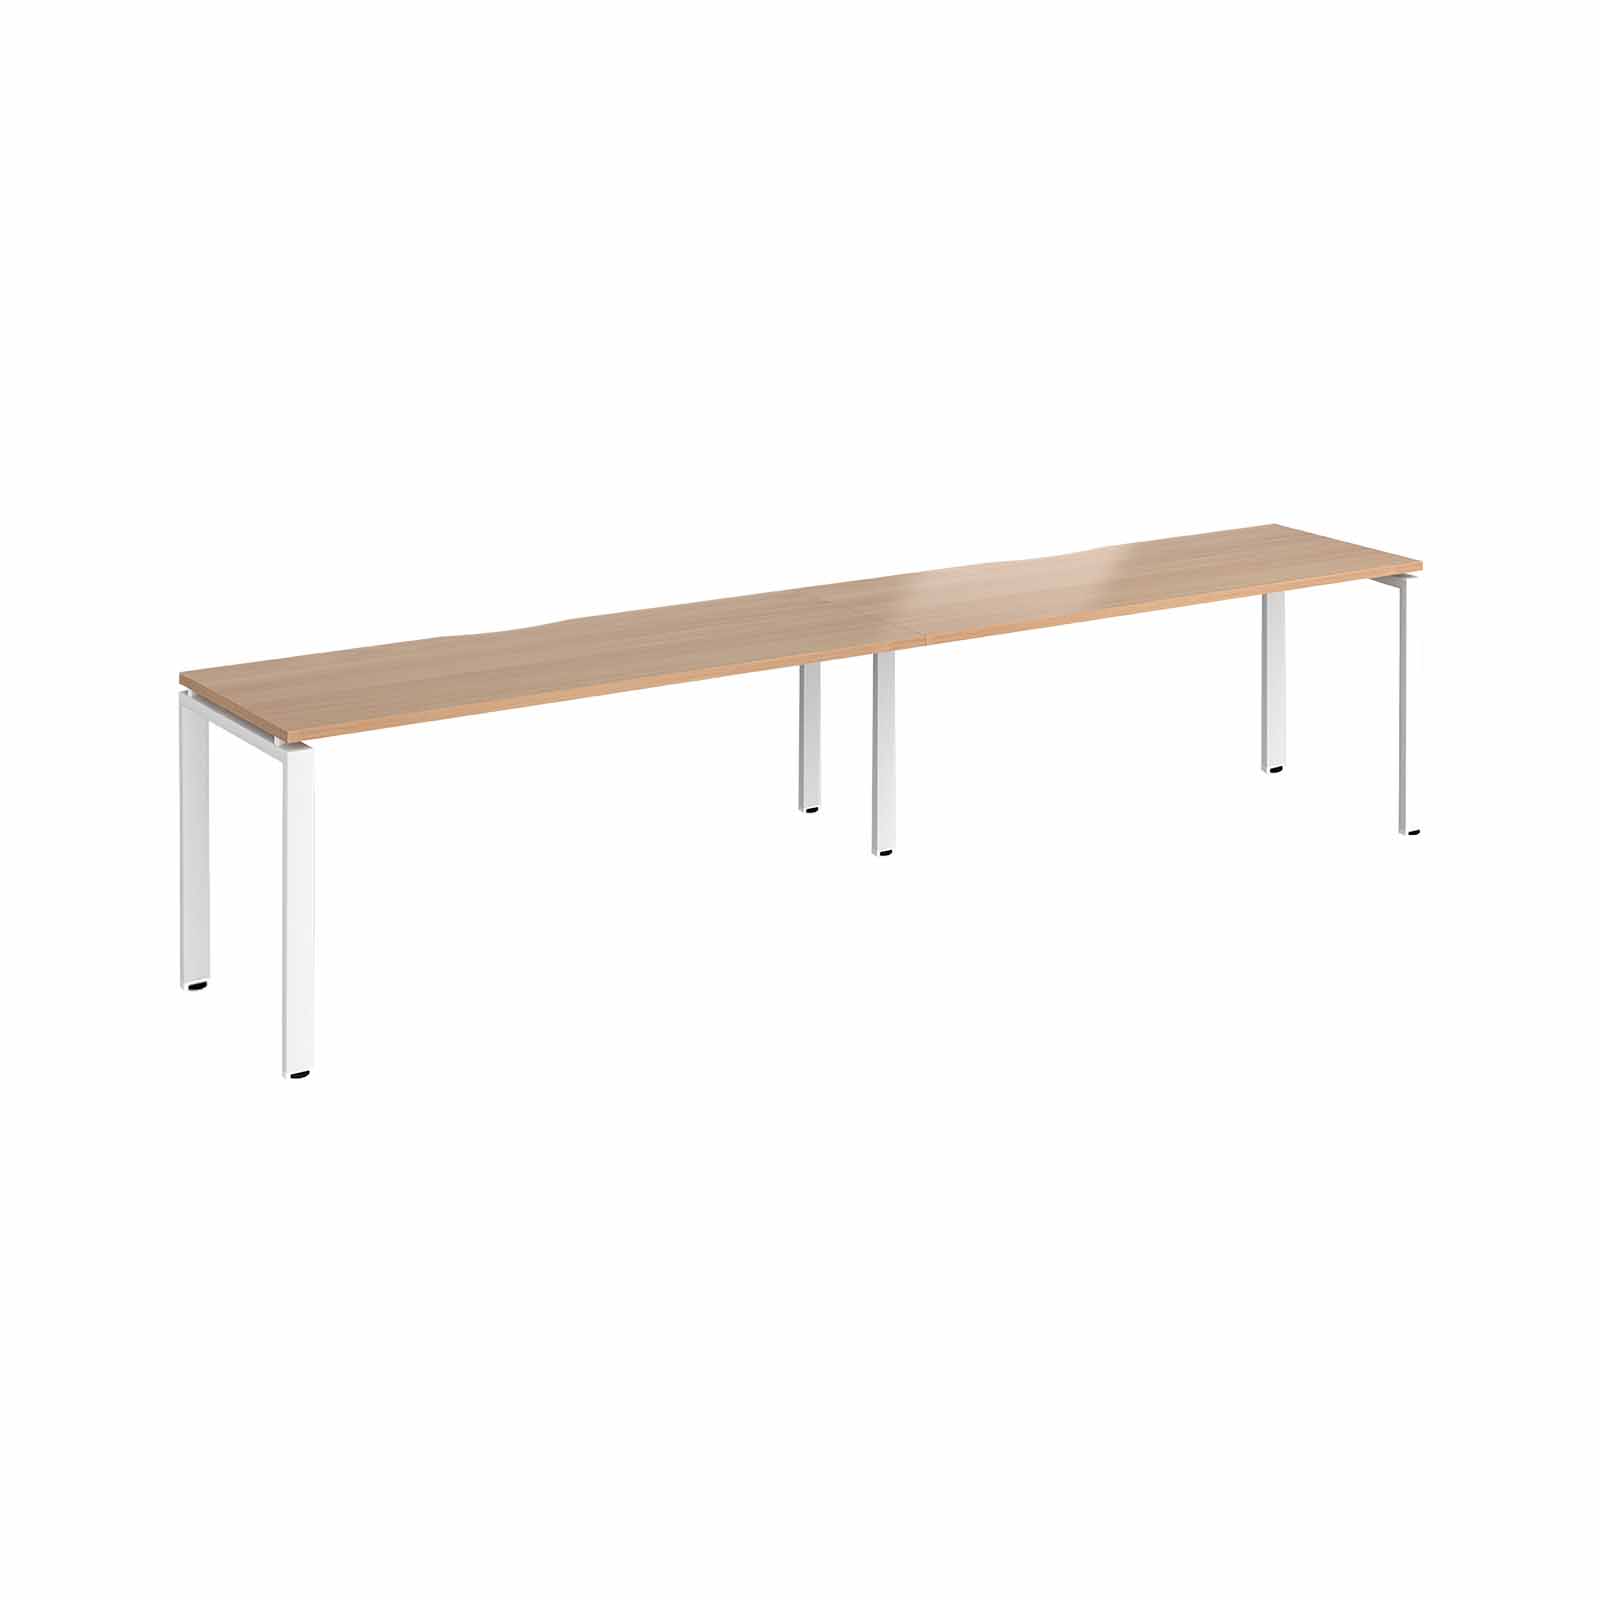 MADE TO ORDER 2 Person Single Row Bench Desk W1000mm x D600mm x H740mm